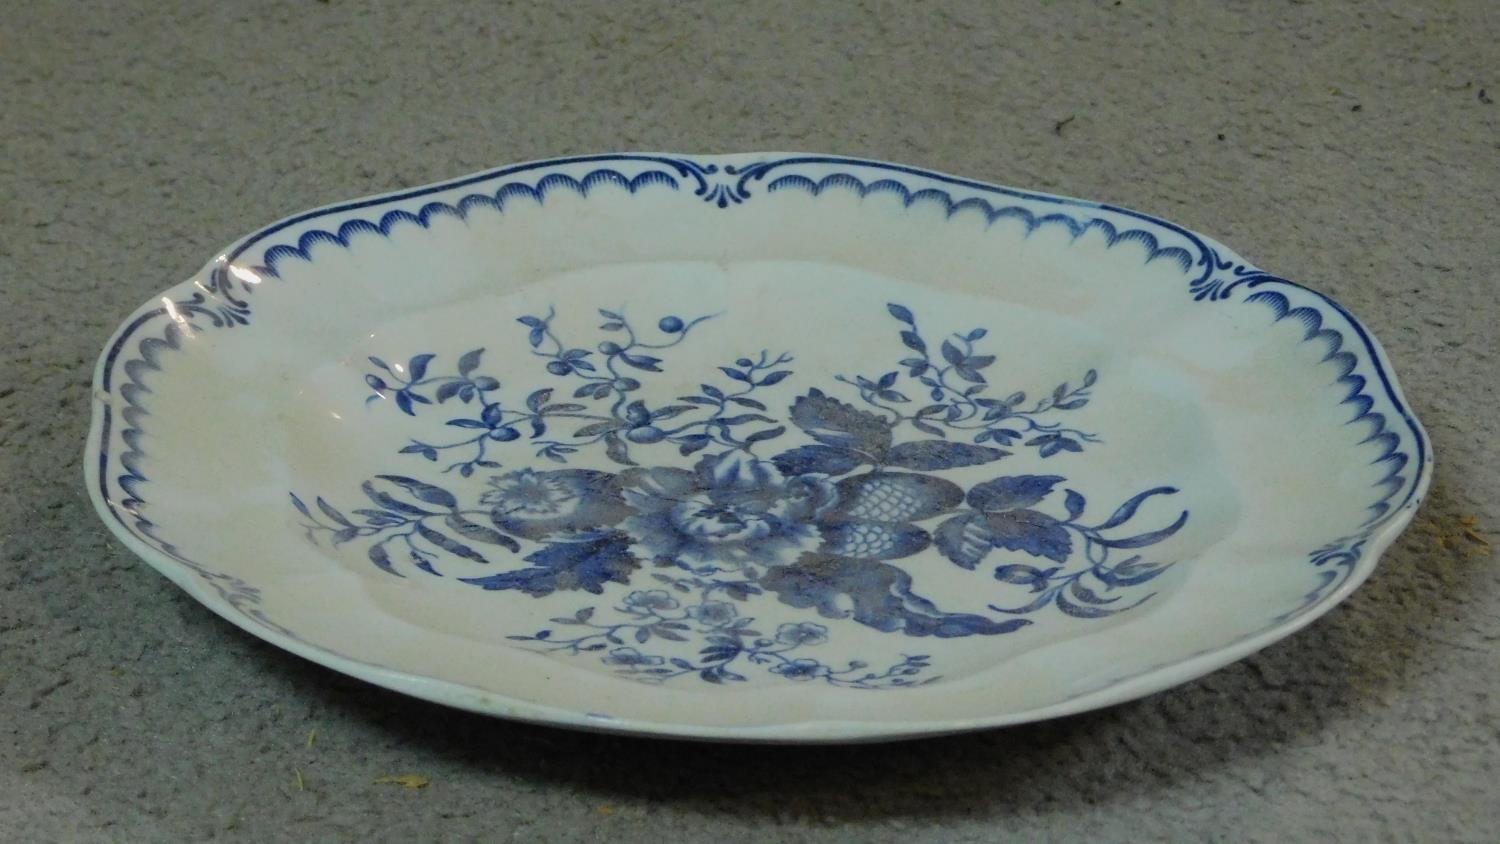 An early 19th century Worcester blue and white porcelain plate with a floral and foliate design - Image 5 of 5